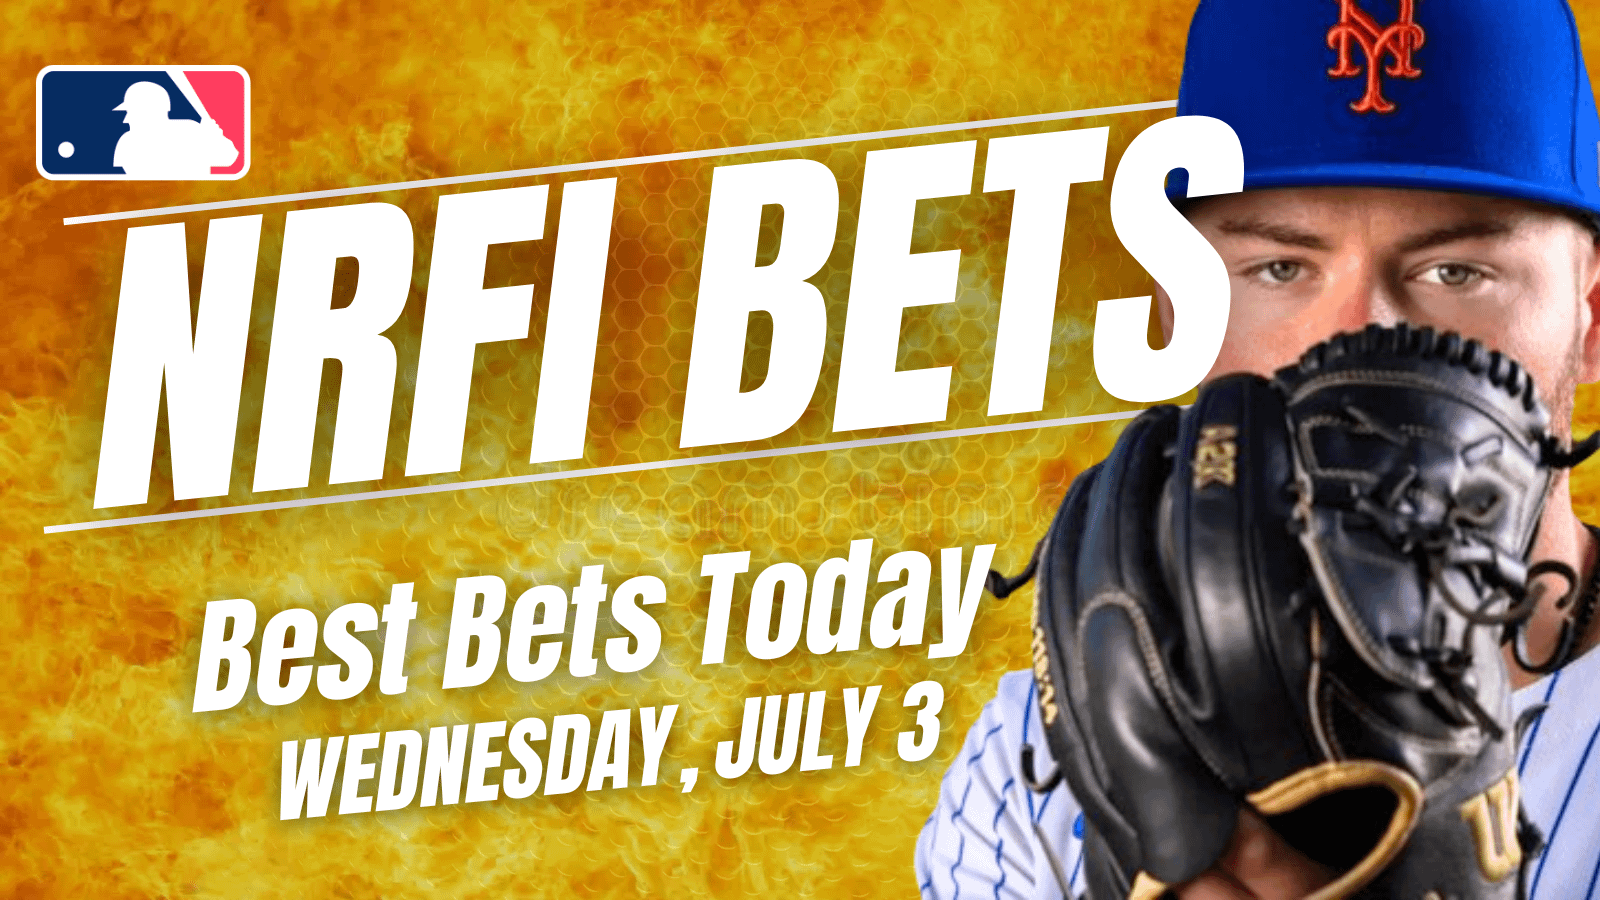 Get the best NRFI bets for today: Here are the top no run first inning picks, predictions and prop bets for Wednesday, July 3 ...